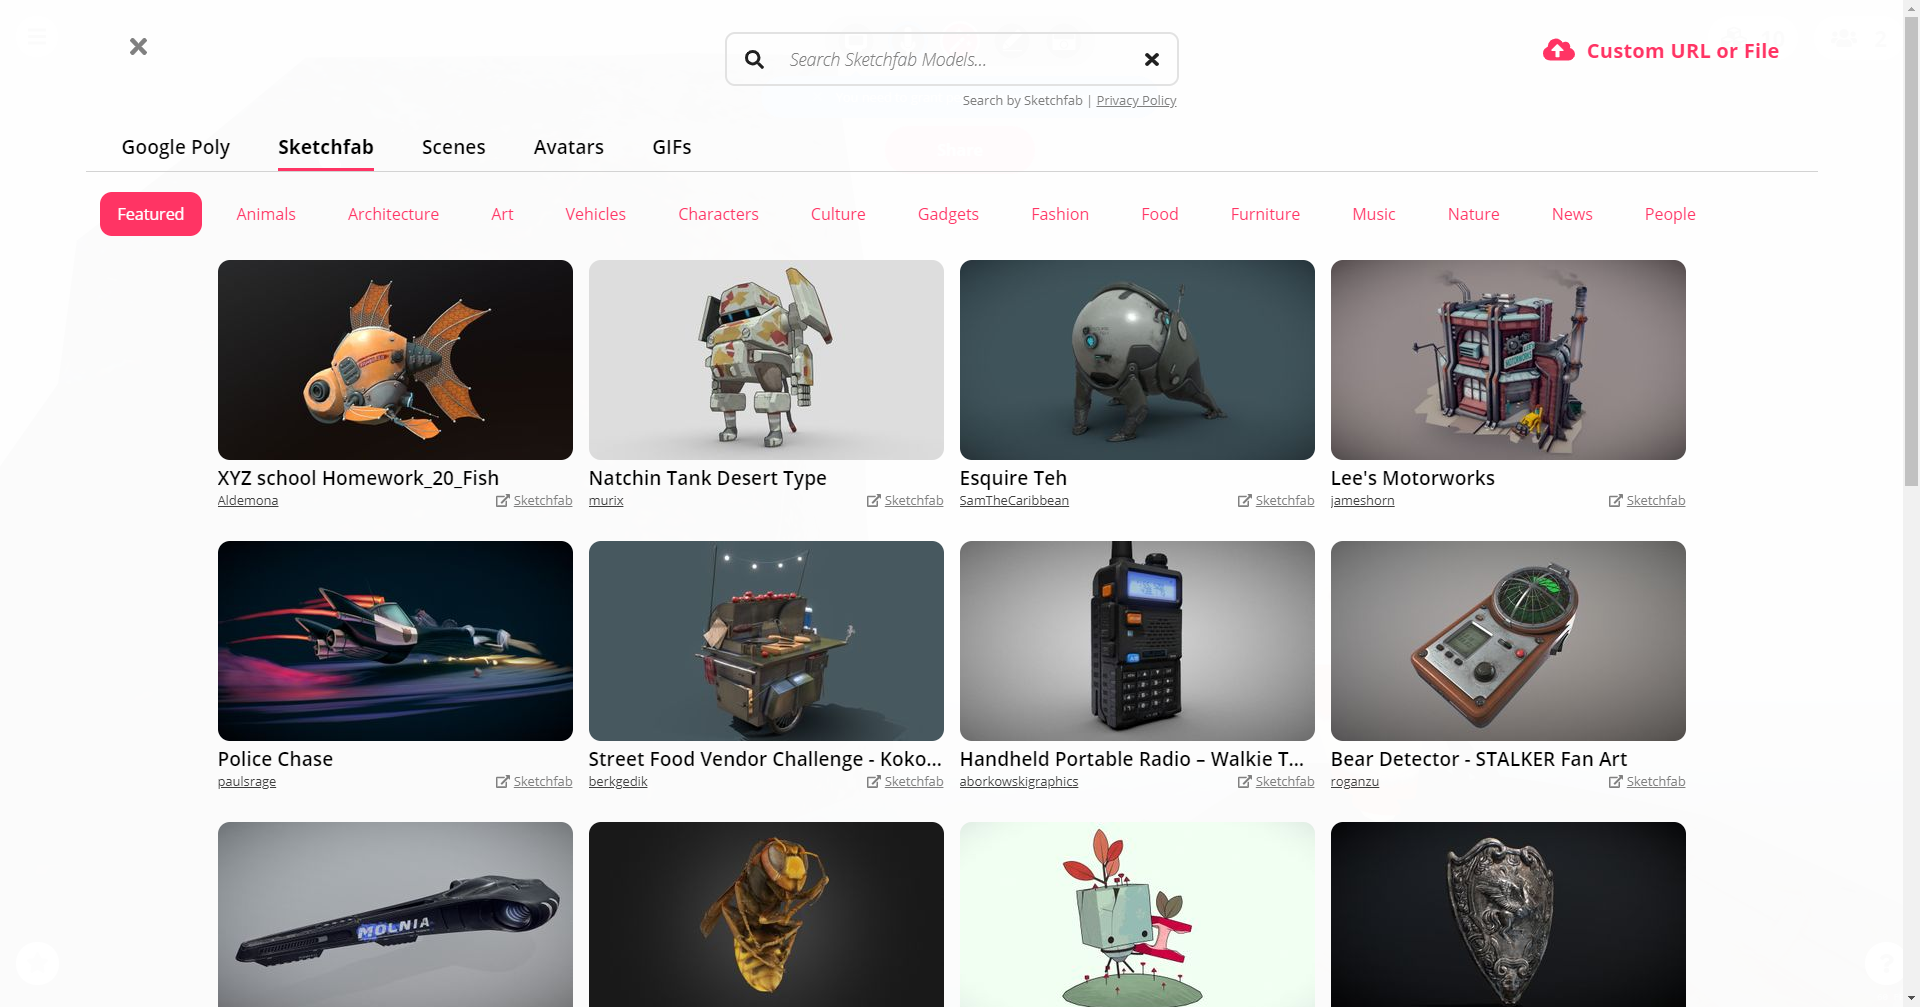 You can select objects from Sketchfab, as well as other object libraries